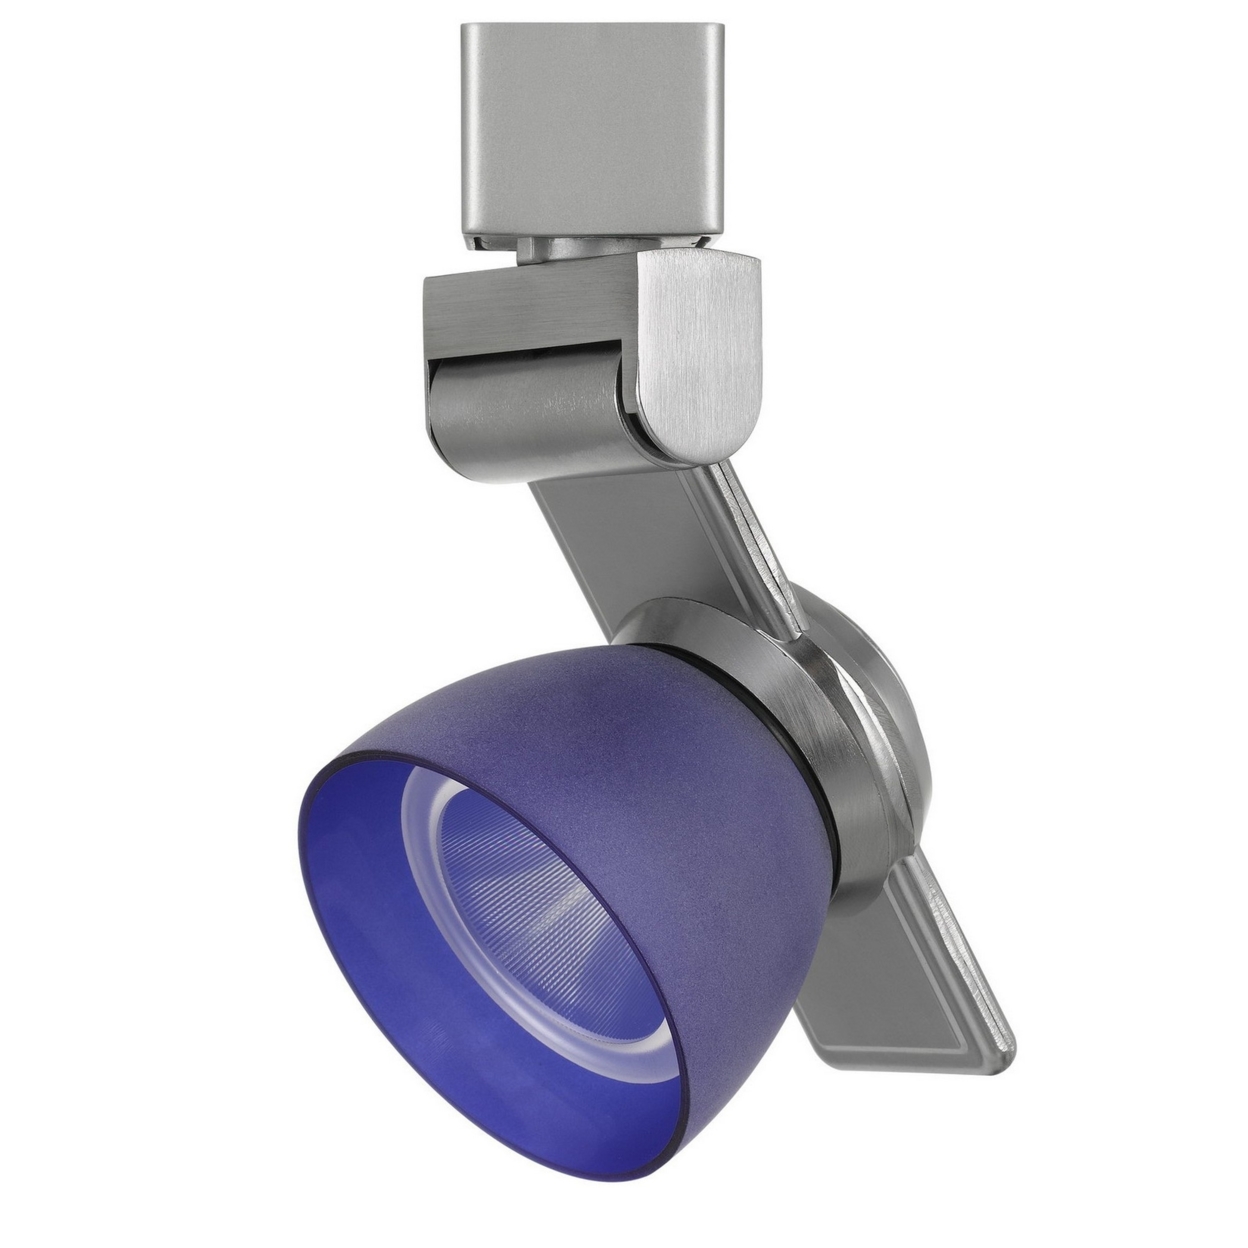 12W Integrated Metal And Polycarbonate LED Track Fixture, Silver And Blue- Saltoro Sherpi